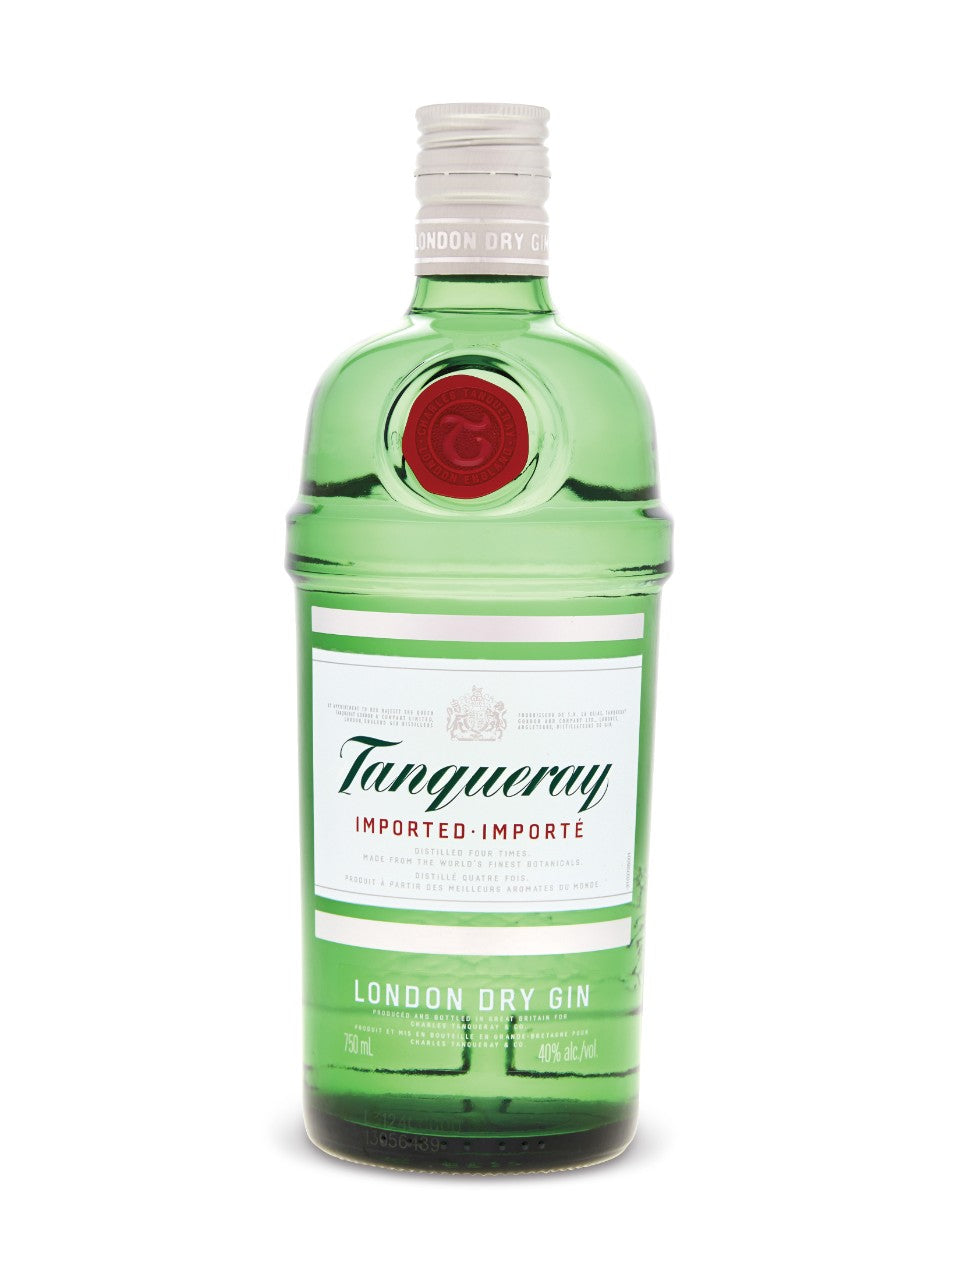 TANQUERAY LONDON DRY GIN 750mL